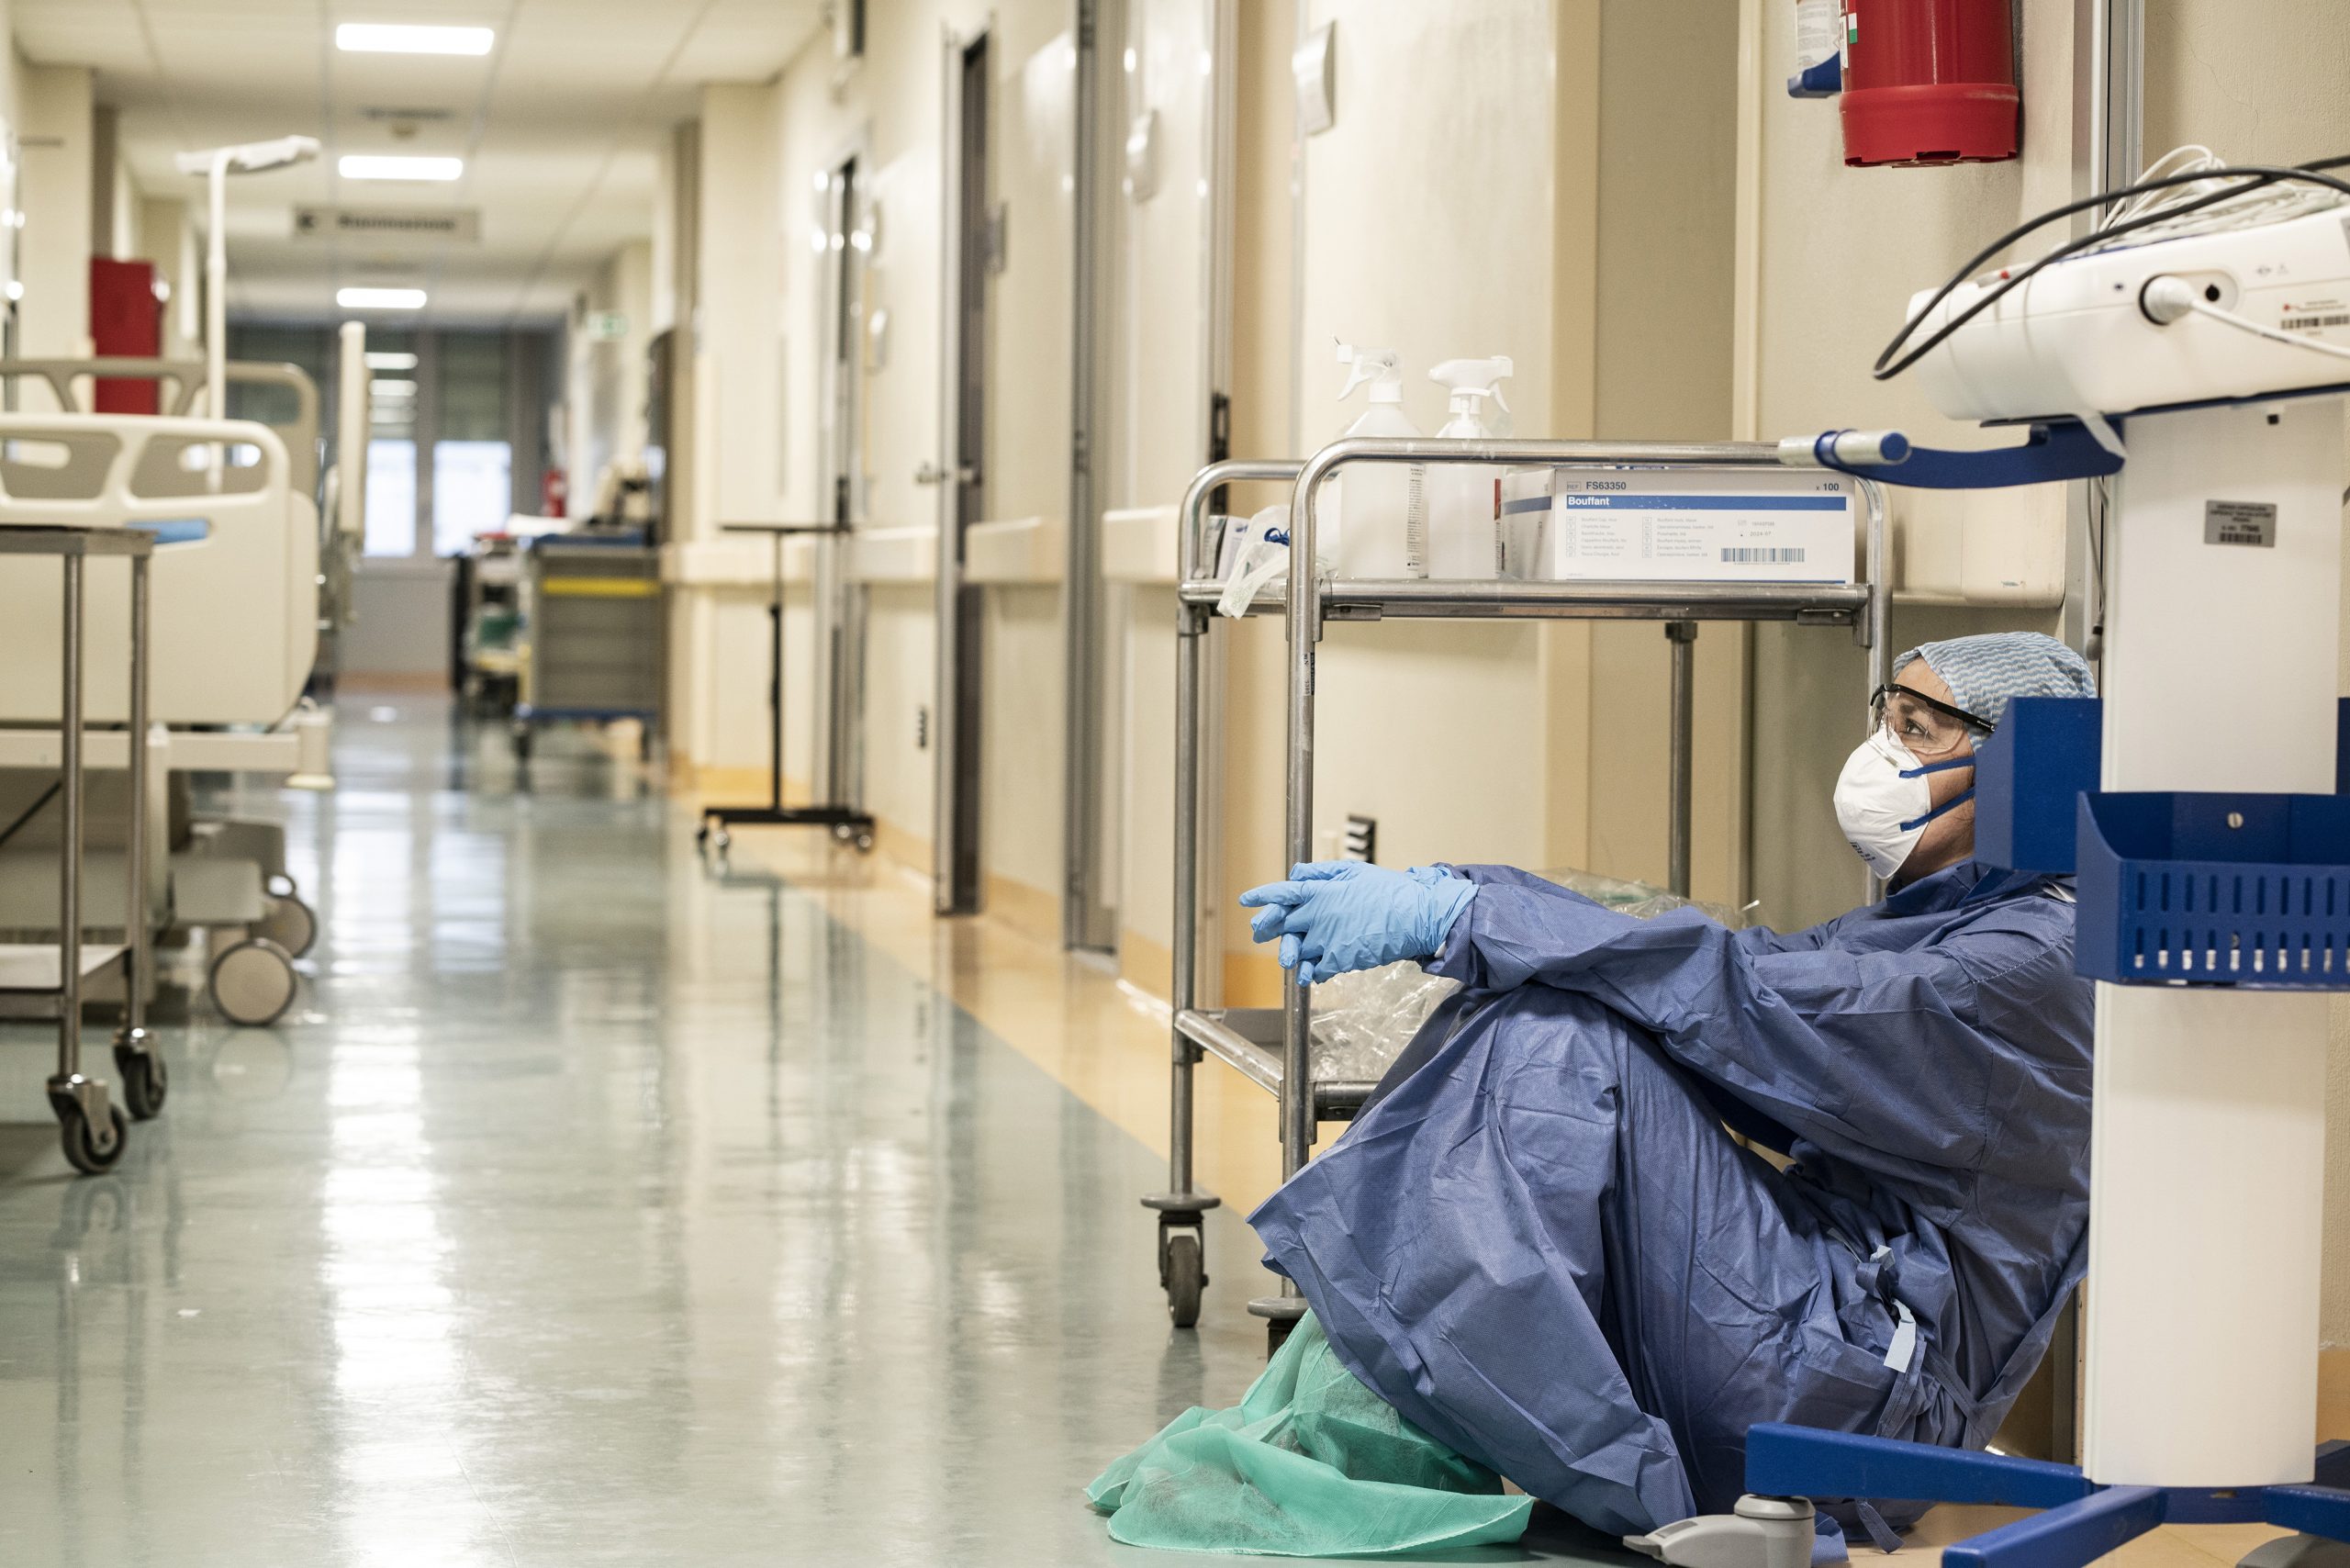 Photo of a person in scrubs slumped down at the end of an empty hospital corridor - licensed under Creative Commons